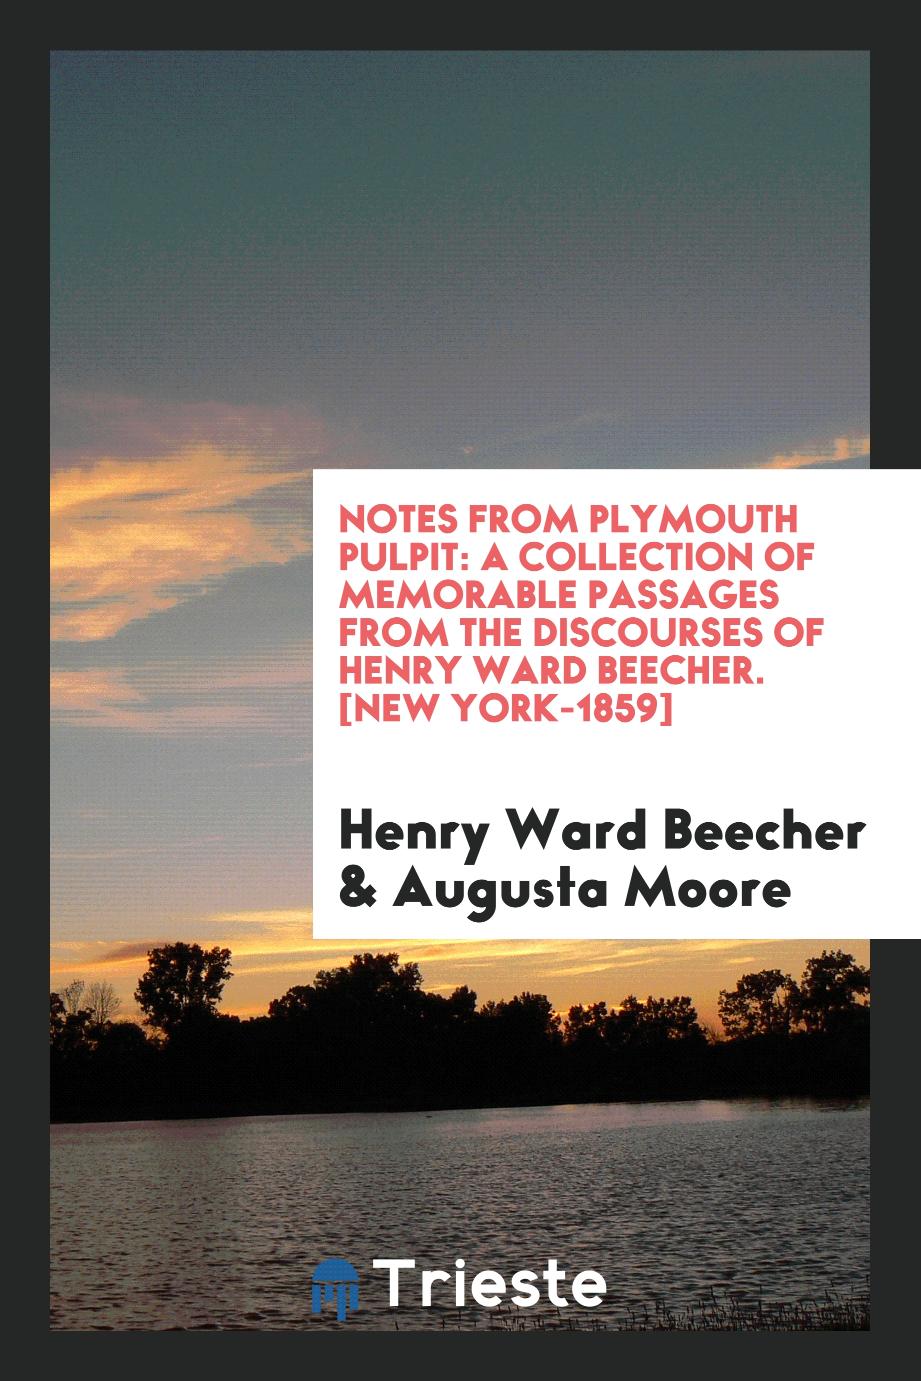 Notes from Plymouth Pulpit: A Collection of Memorable Passages from the Discourses of Henry Ward Beecher. [New York-1859]